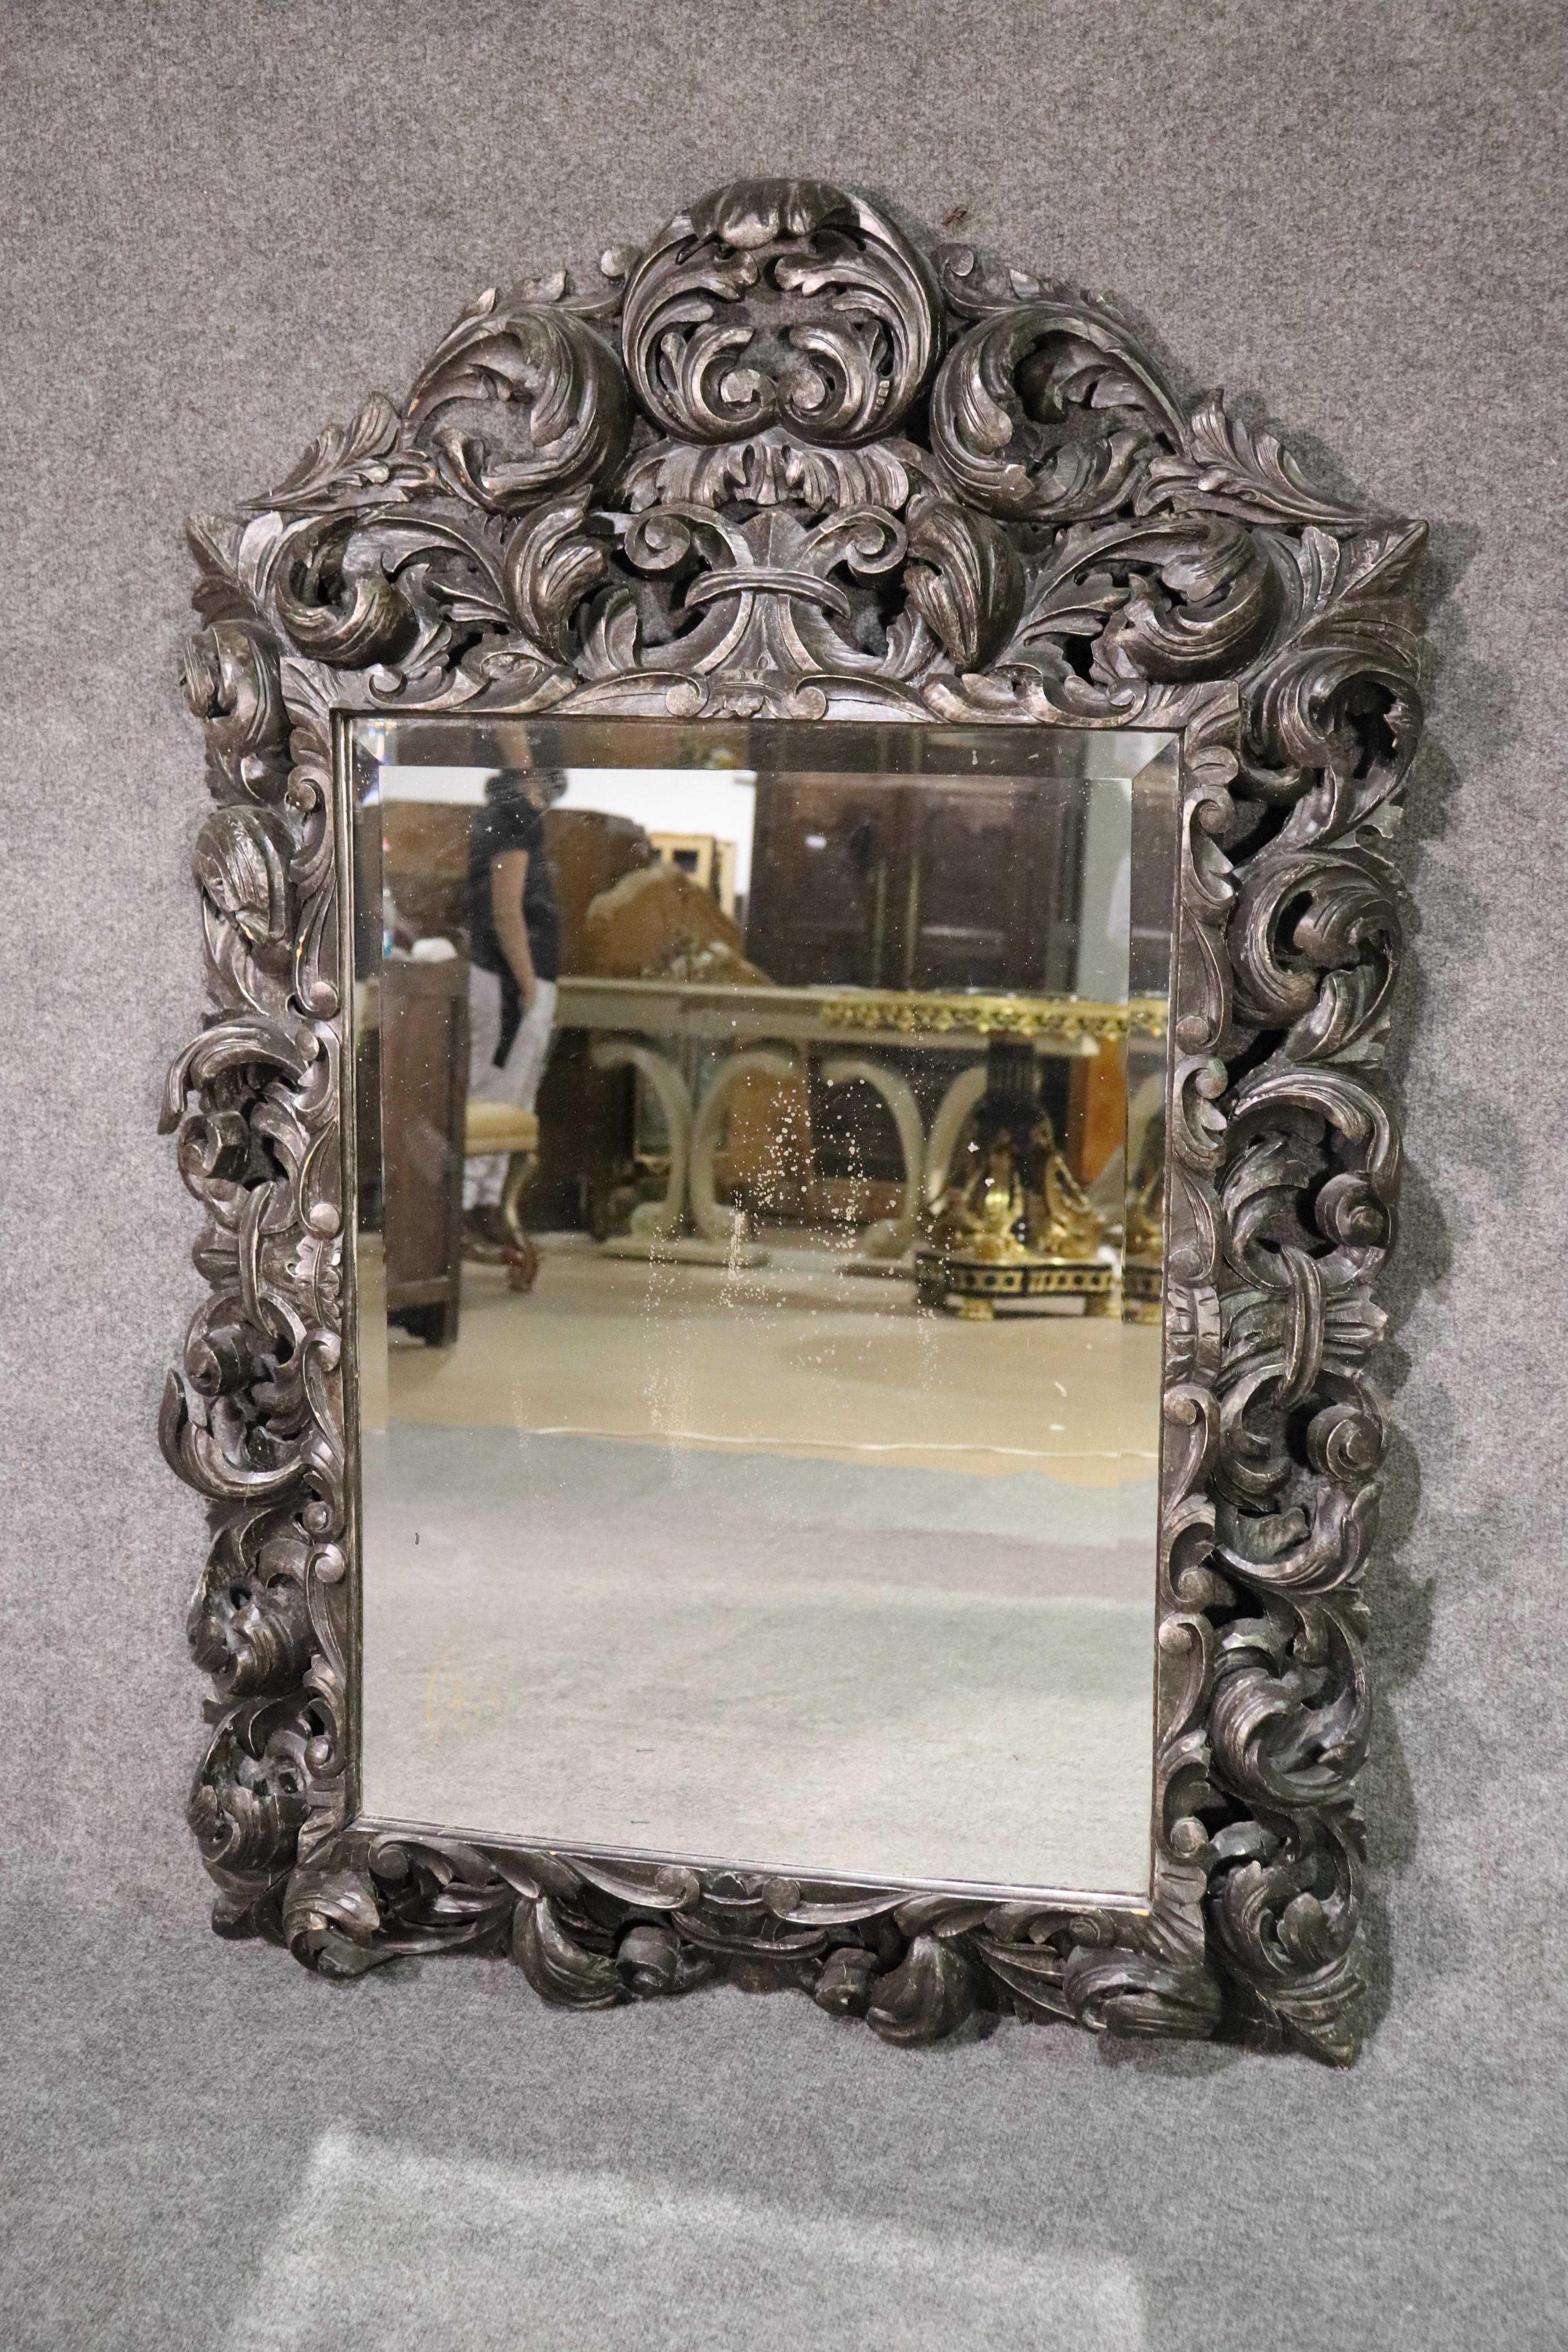 This is a gorgeous carved mirror designed in the Rococo style. The mirror was made in Italy of carved walnut and has a beautiful beveled glass mirror inset. The mirror measures 57 tall x 39 wide. It dates to the 1950s era.